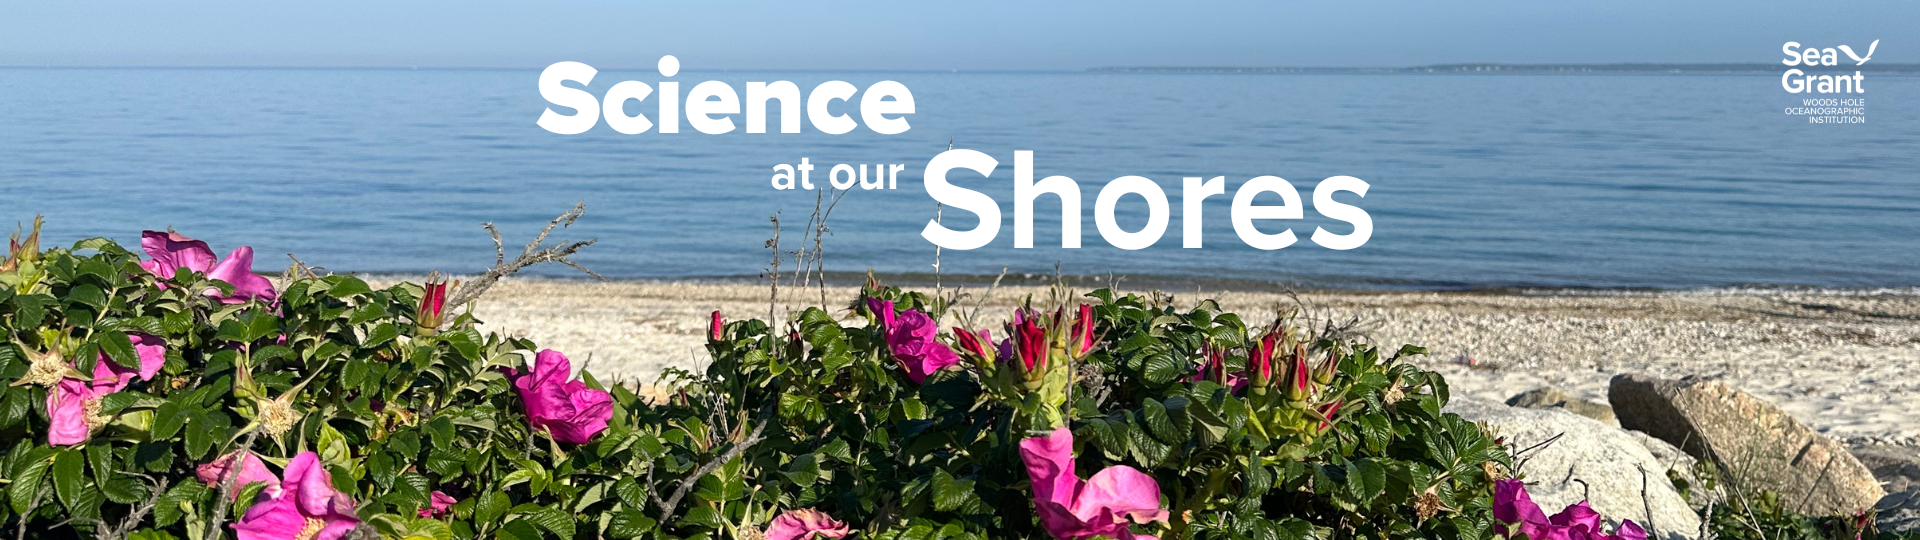 science at our shores - website banner